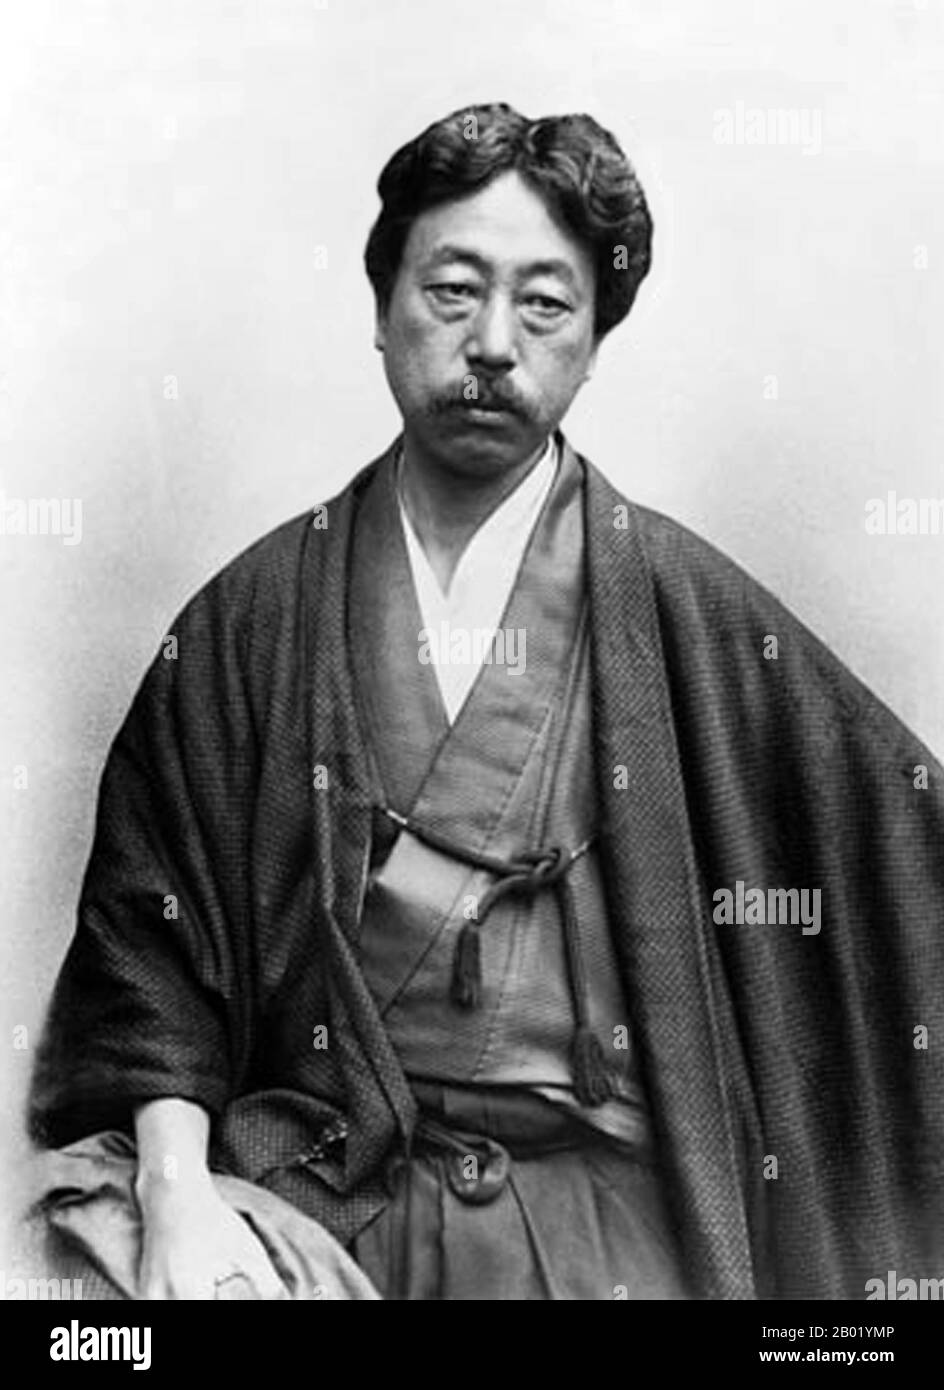 Okakura Kakuzō (岡倉 覚三, February 14, 1862 – September 2, 1913) (also known as 岡倉 天心 Okakura Tenshin) was a Japanese scholar who contributed to the development of arts in Japan. Outside of Japan, he is chiefly remembered today as the author of 'The Book of Tea'. Stock Photo